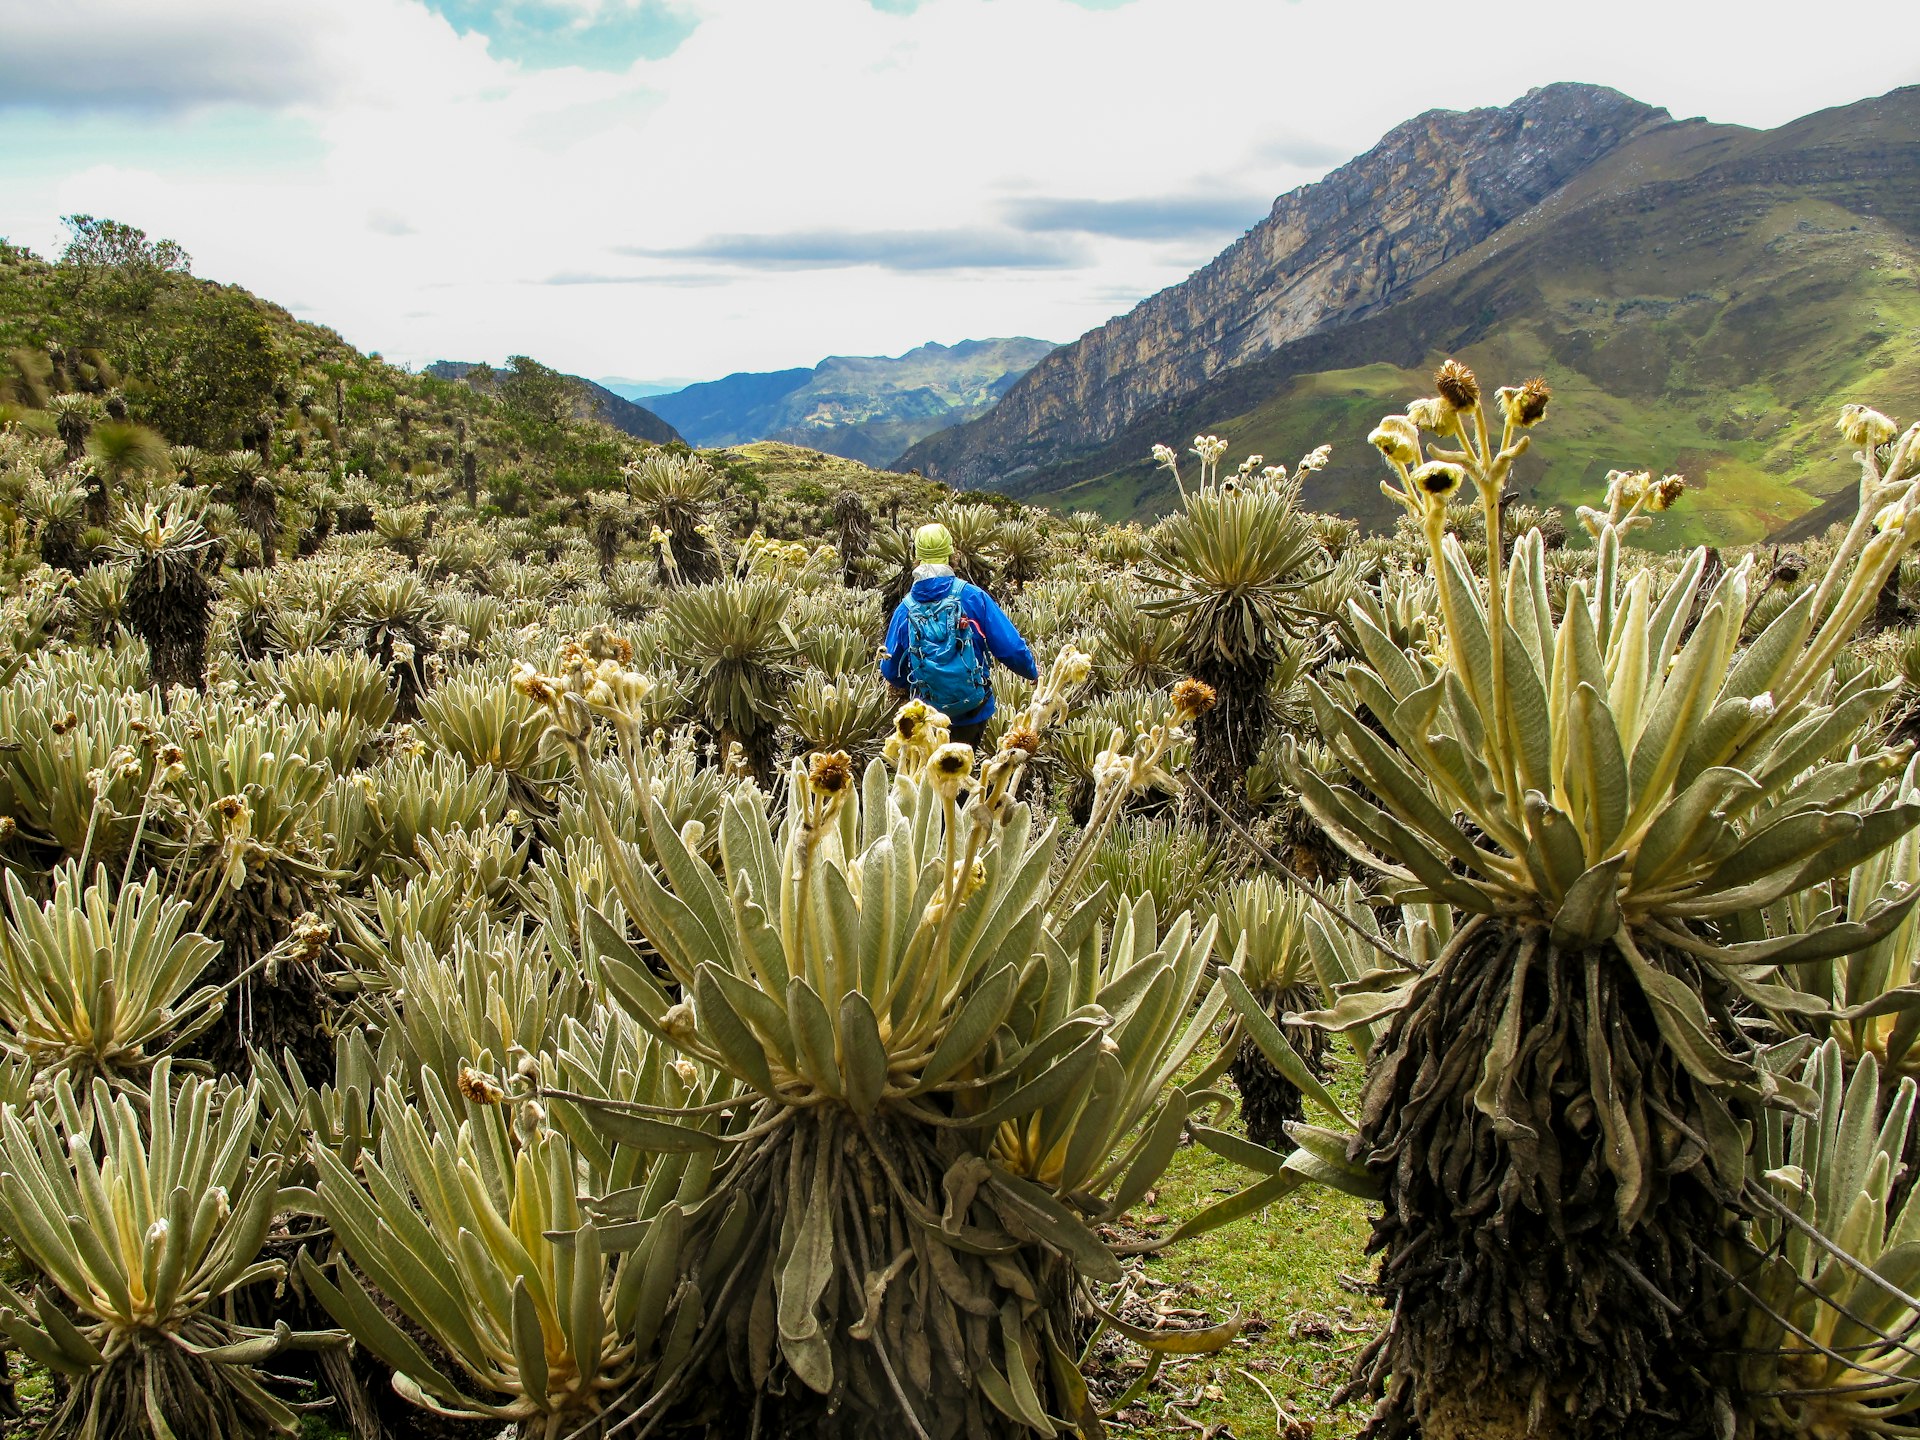 Hiker in Colombian paramo highland of Cocuy National Park, surrounded by the beautiful Frailejones plants